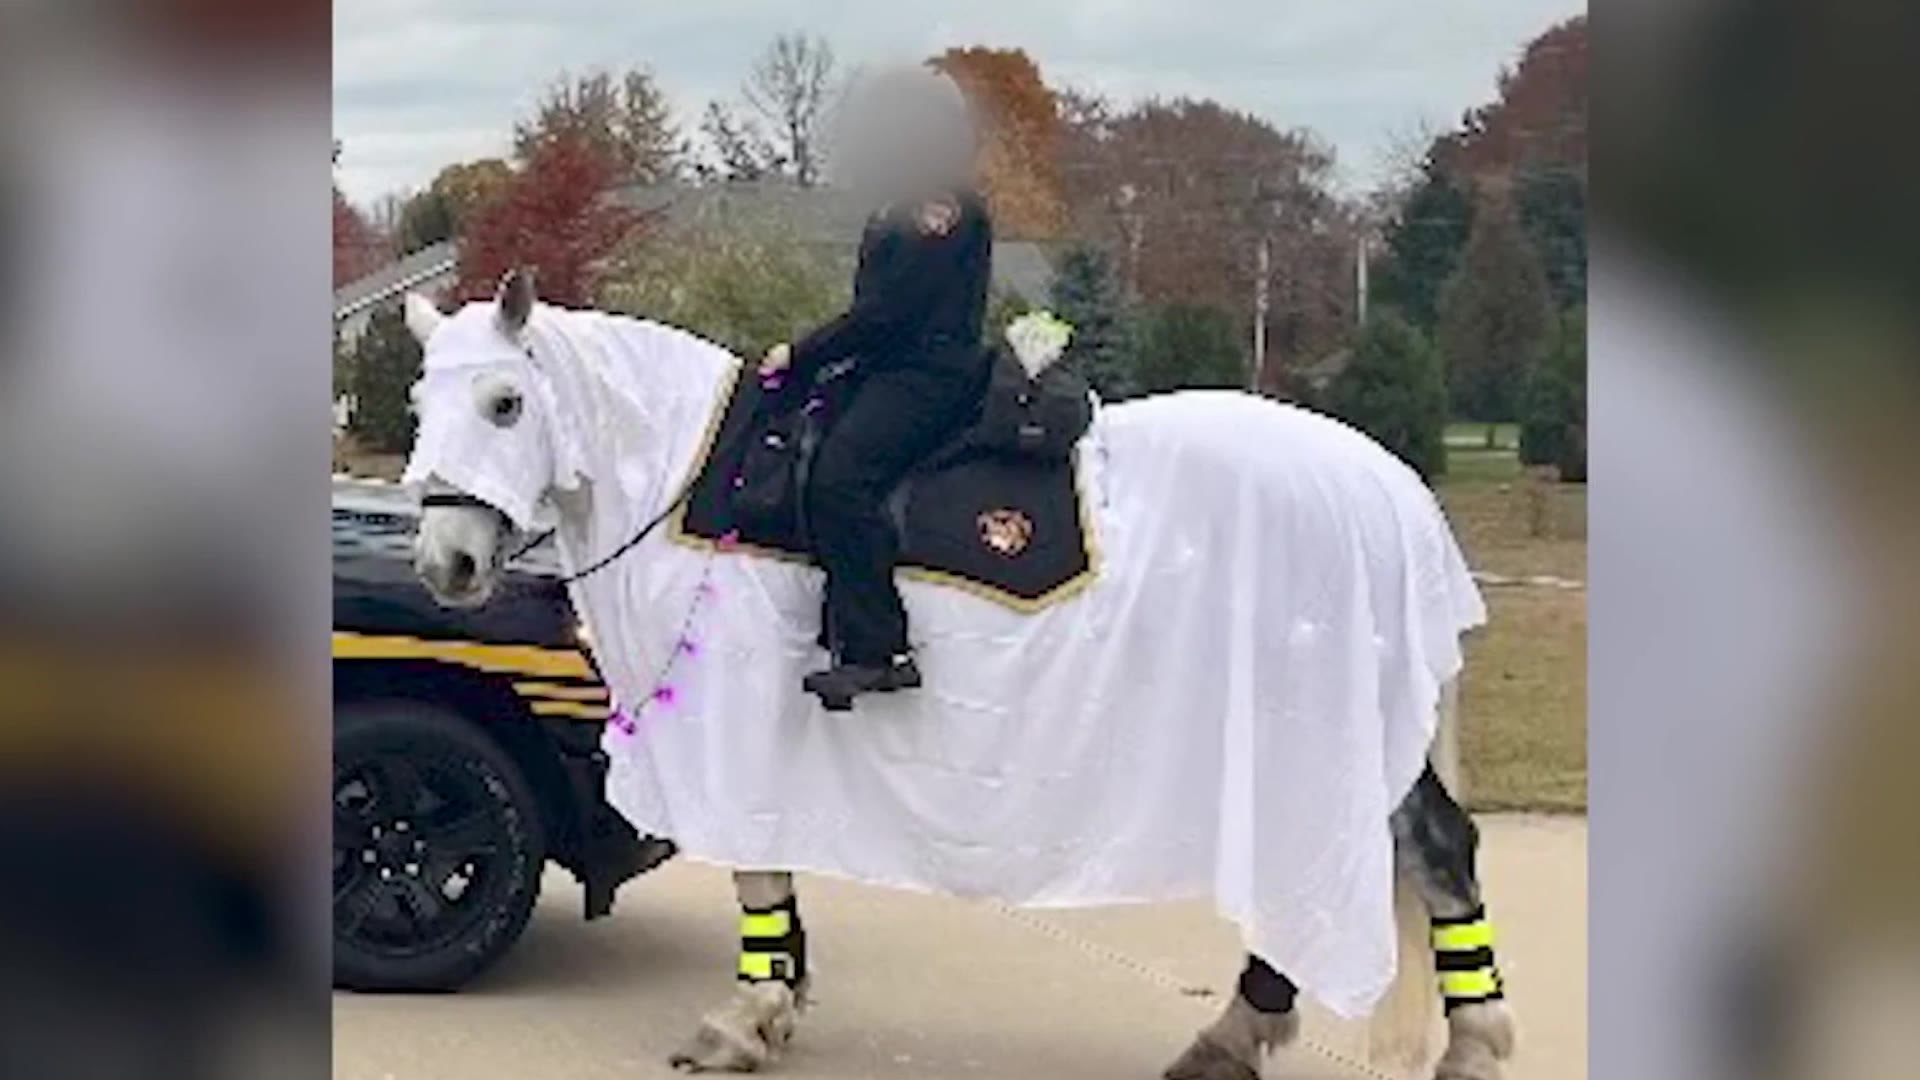 Sheriff defends horse 'ghost costume' criticised for KKK